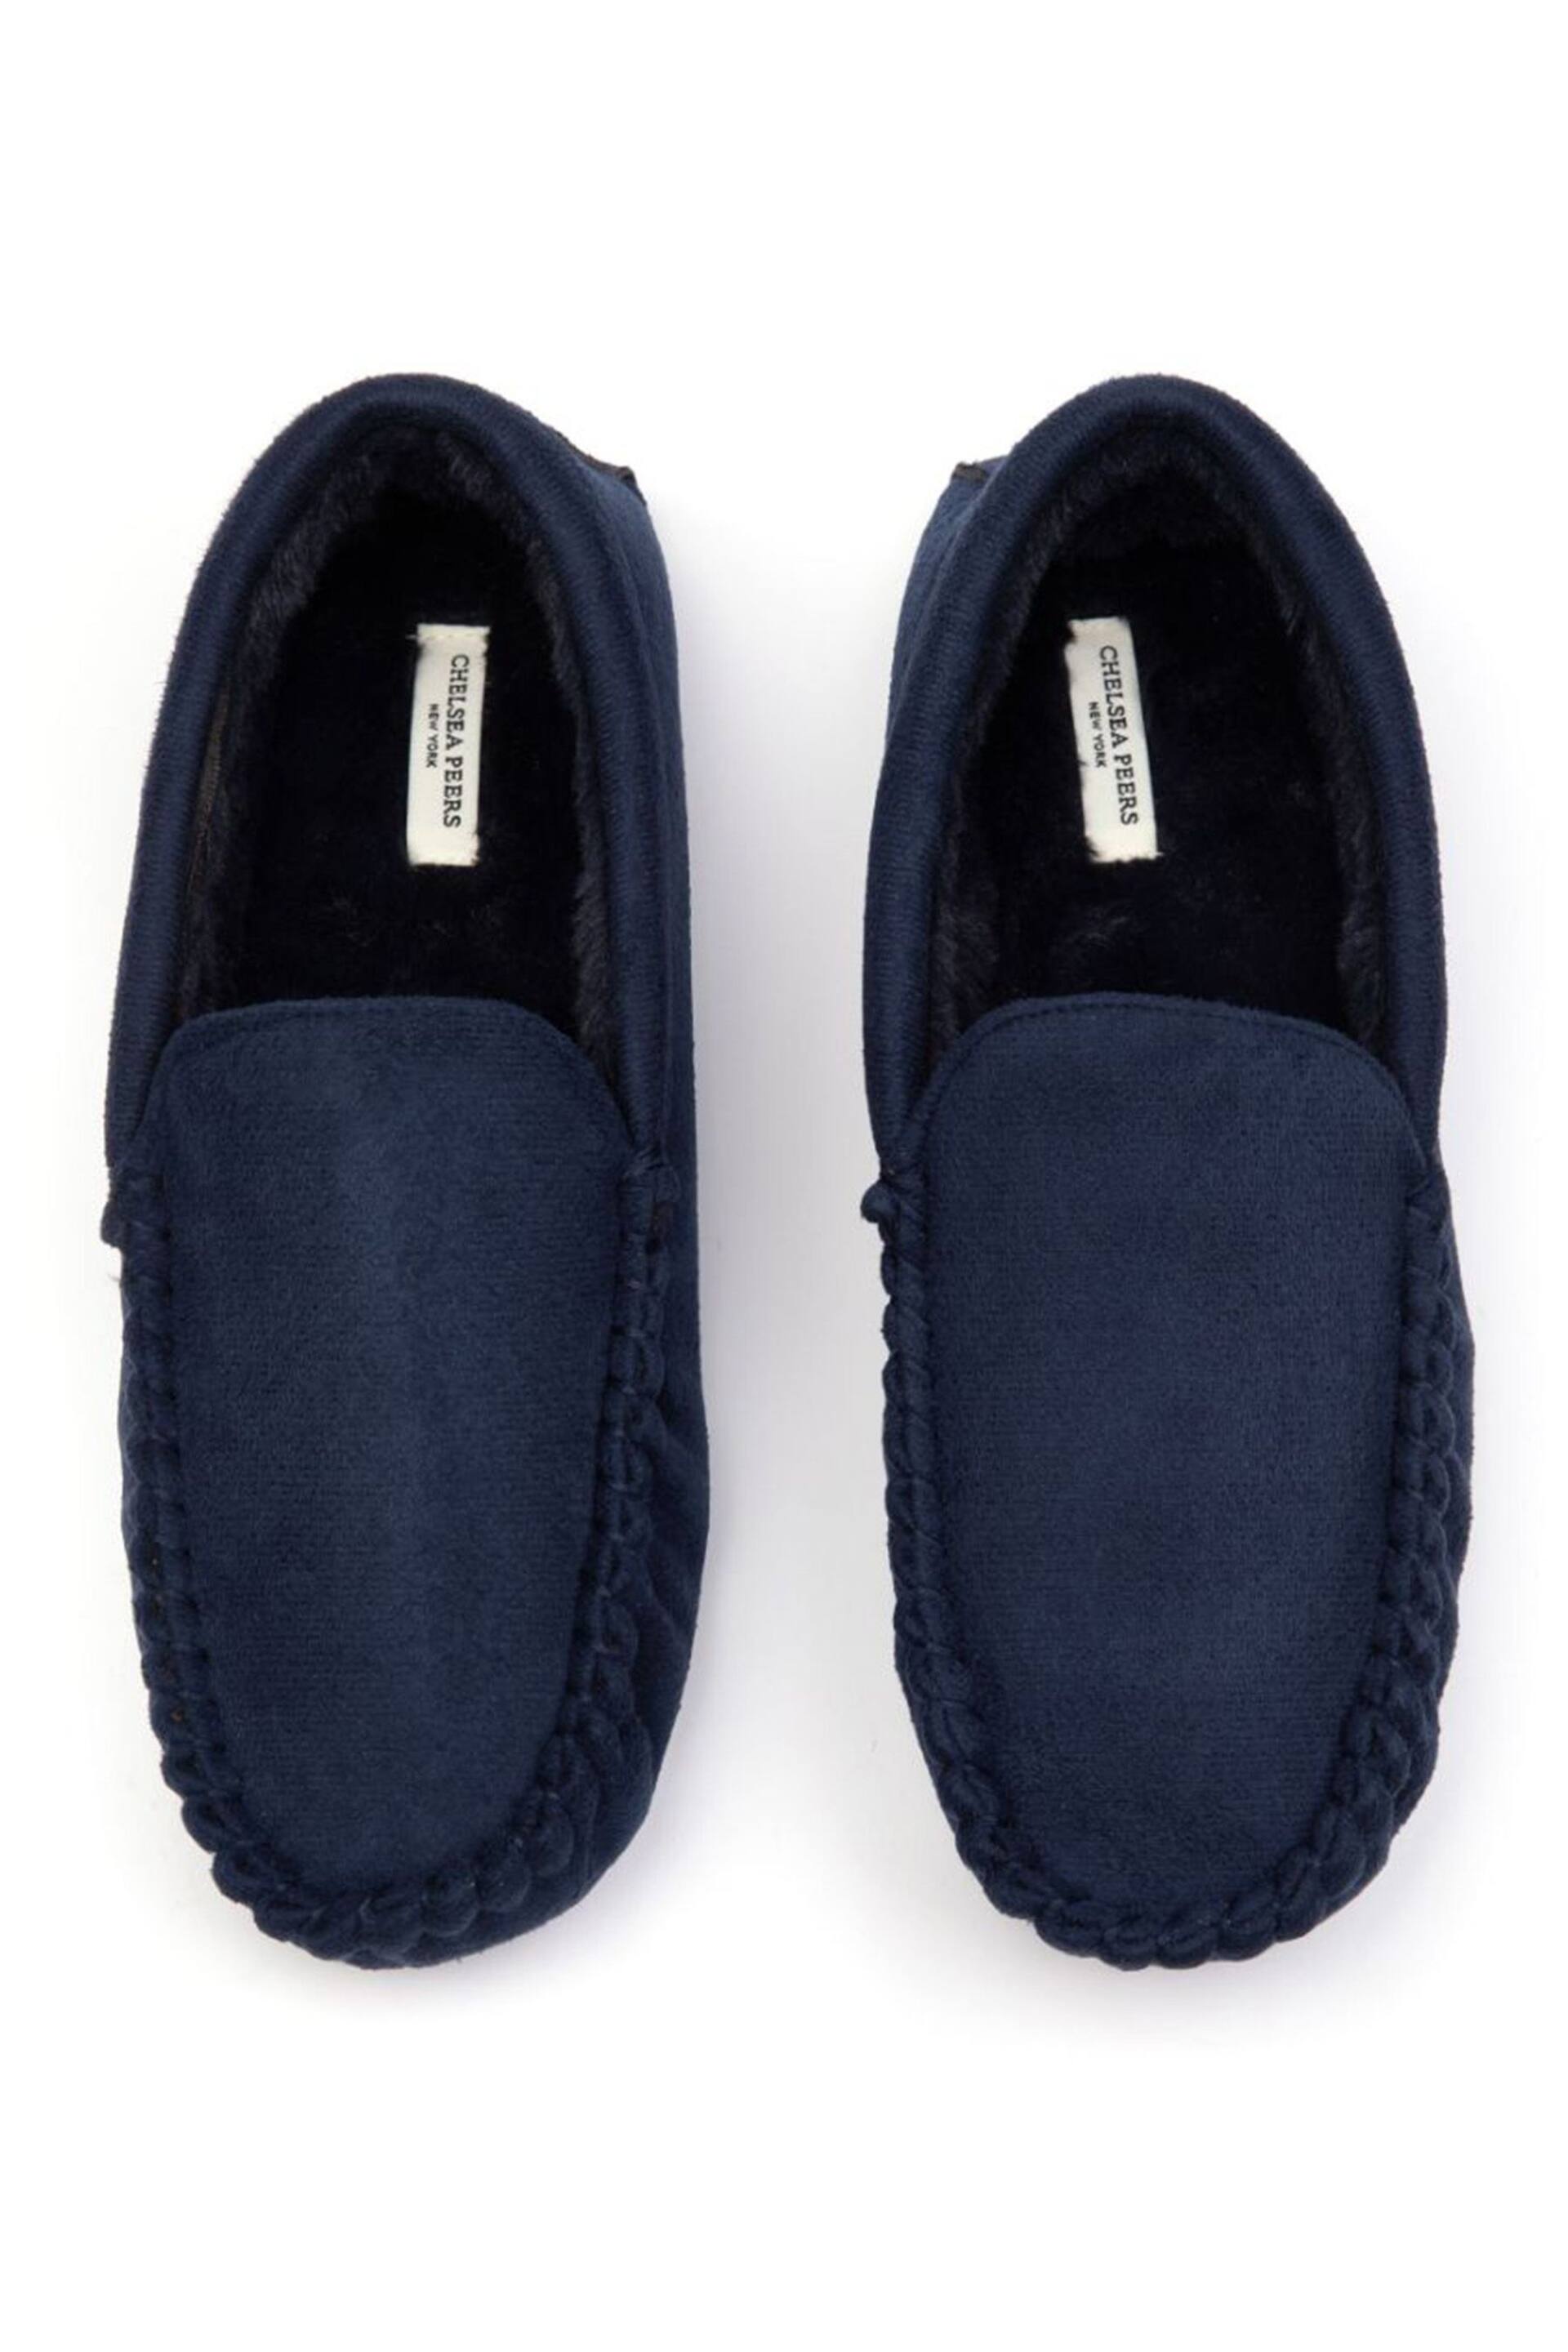 Chelsea Peers Blue Suedette Moccasin Slippers - Men's - Image 1 of 4